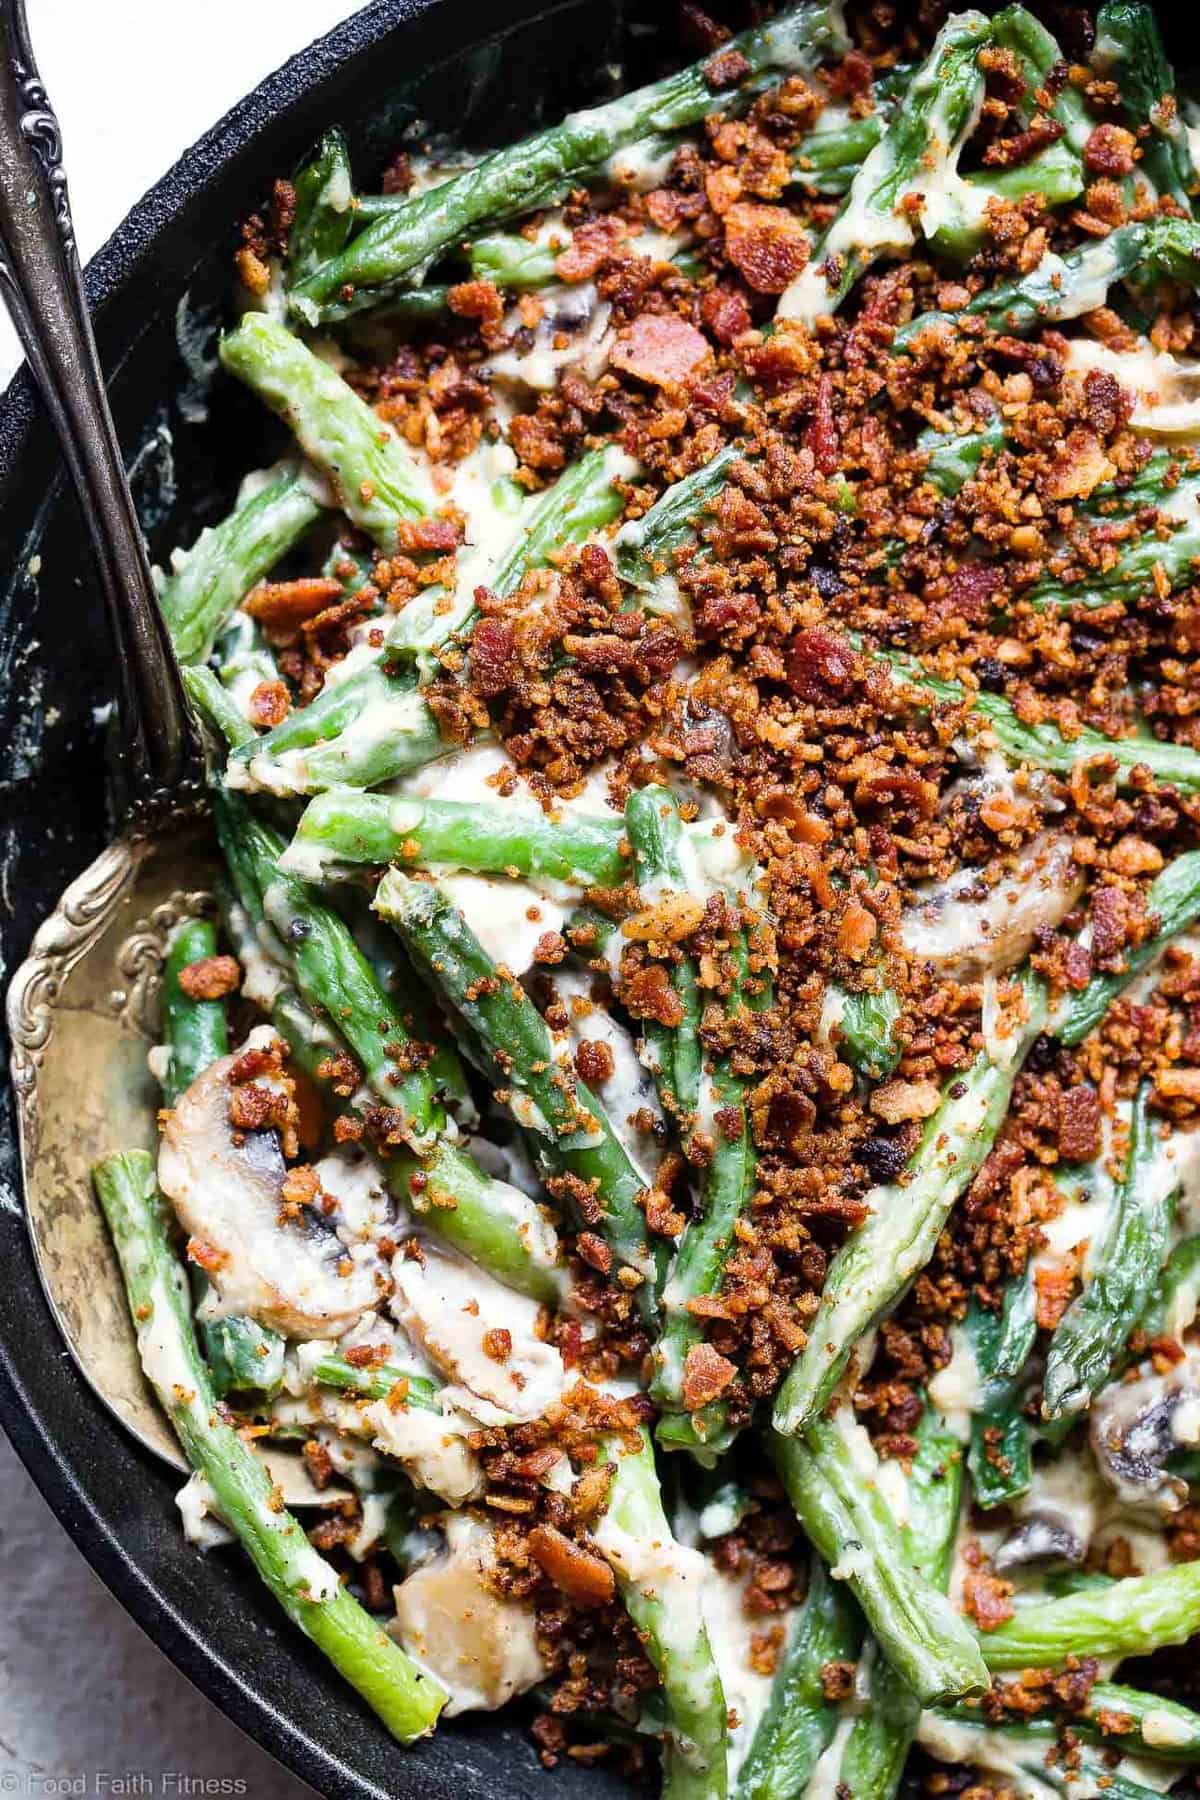 Low Carb Keto Green Bean Casserole - This Low Carb Green Bean Casserole is an EASY, healthy remake of the classic side! No one will know it's better for you! Dairy free option included! | #Foodfaithfitness | #Glutenfree #Dairyfree #Keto #Lowcarb #Healthy